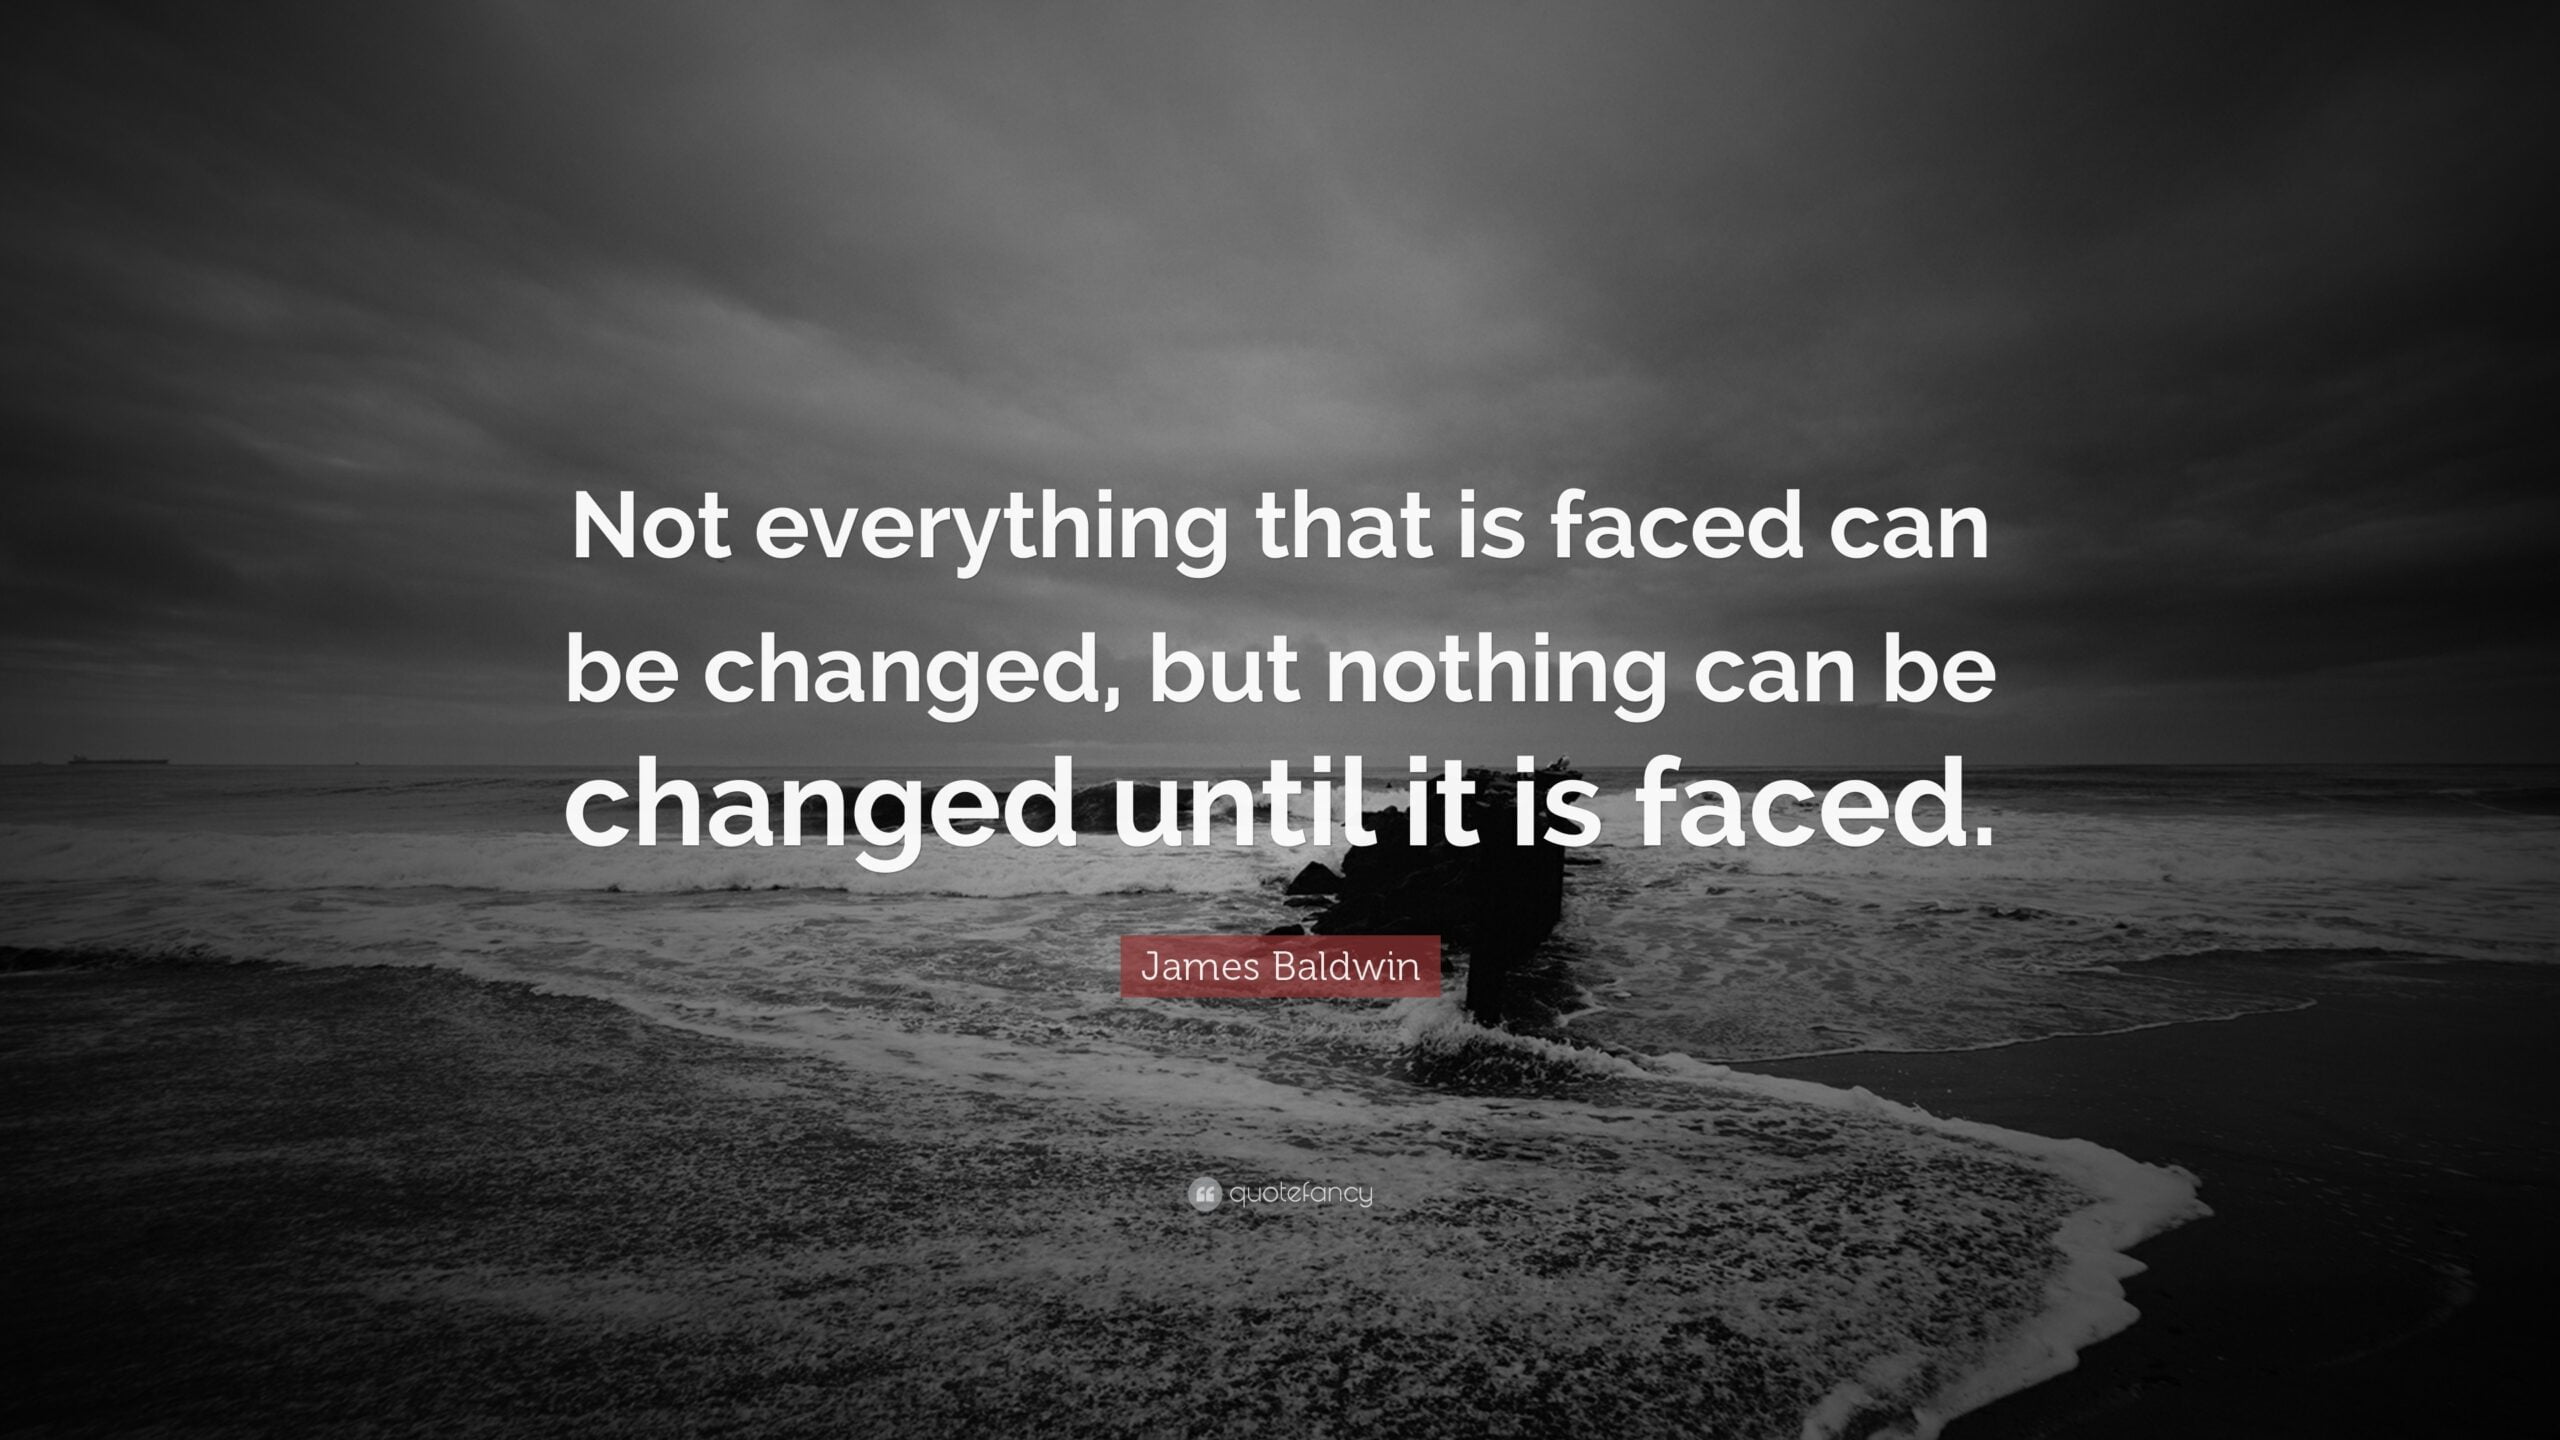 JAMES BALDWIN  “Not everything that is faced can be changed but nothing can be changed until it is faced”